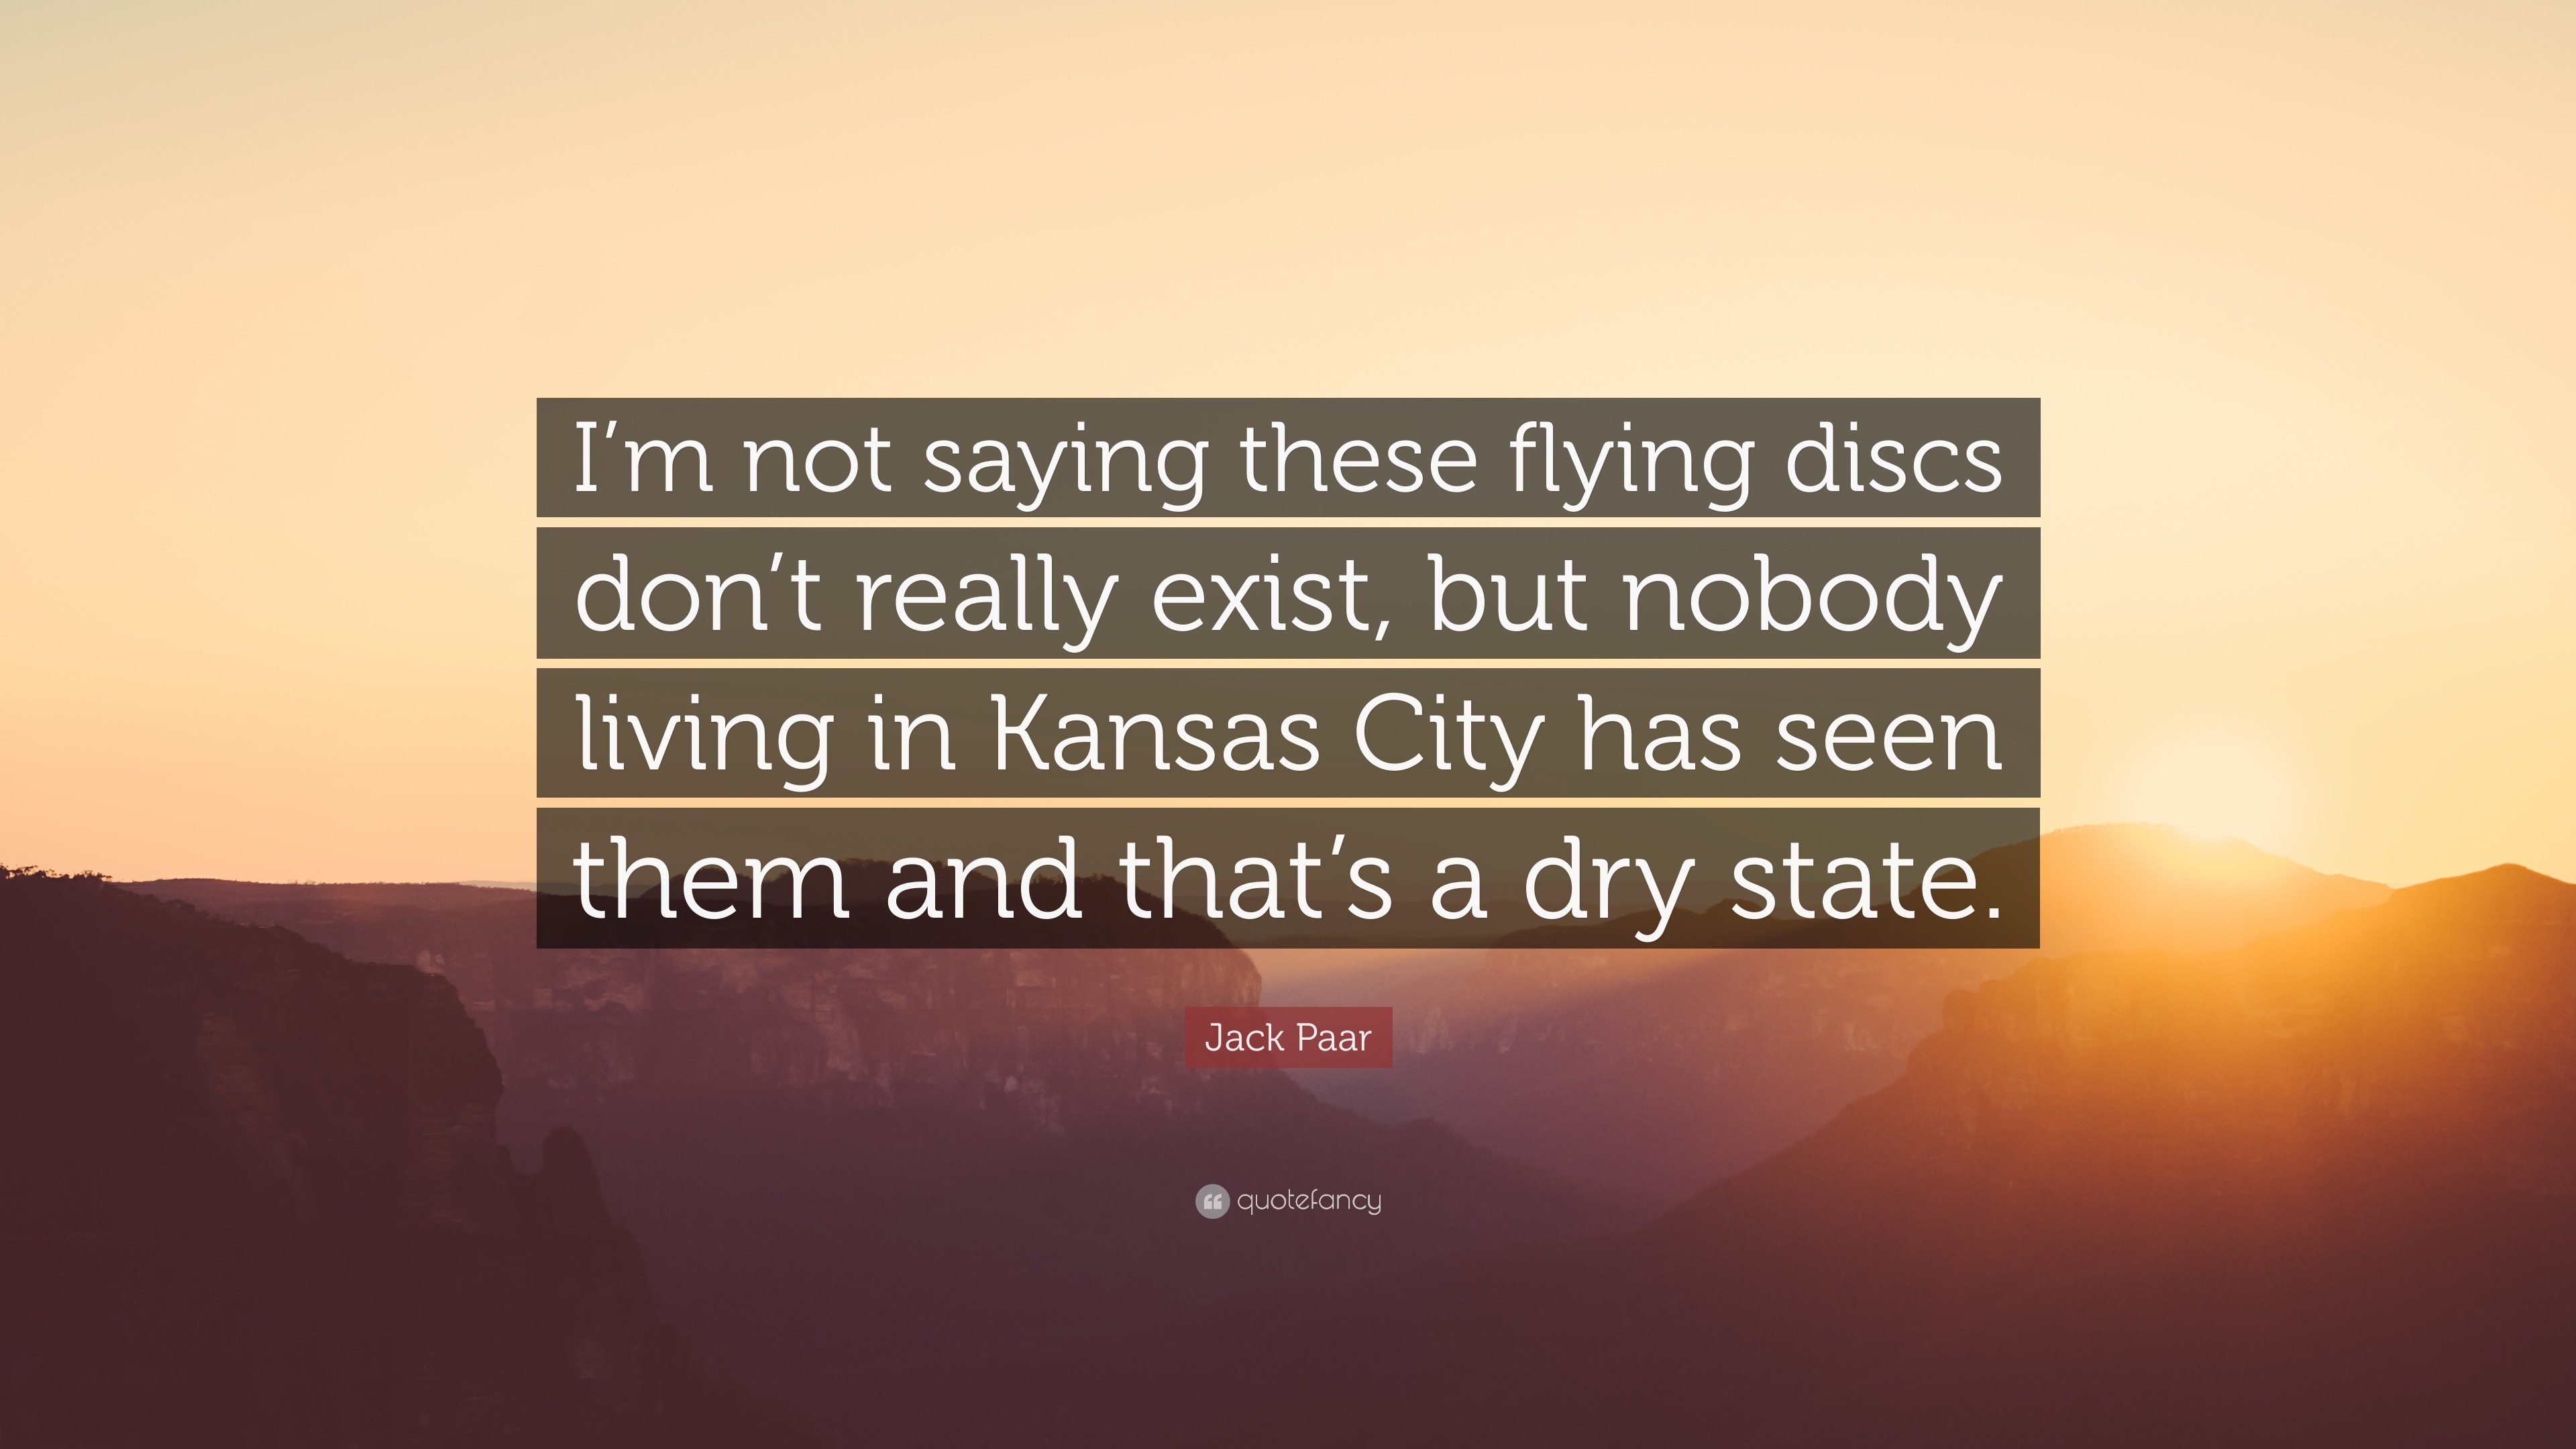 Jack Paar Quote: “I'm not saying these flying discs don't really exist